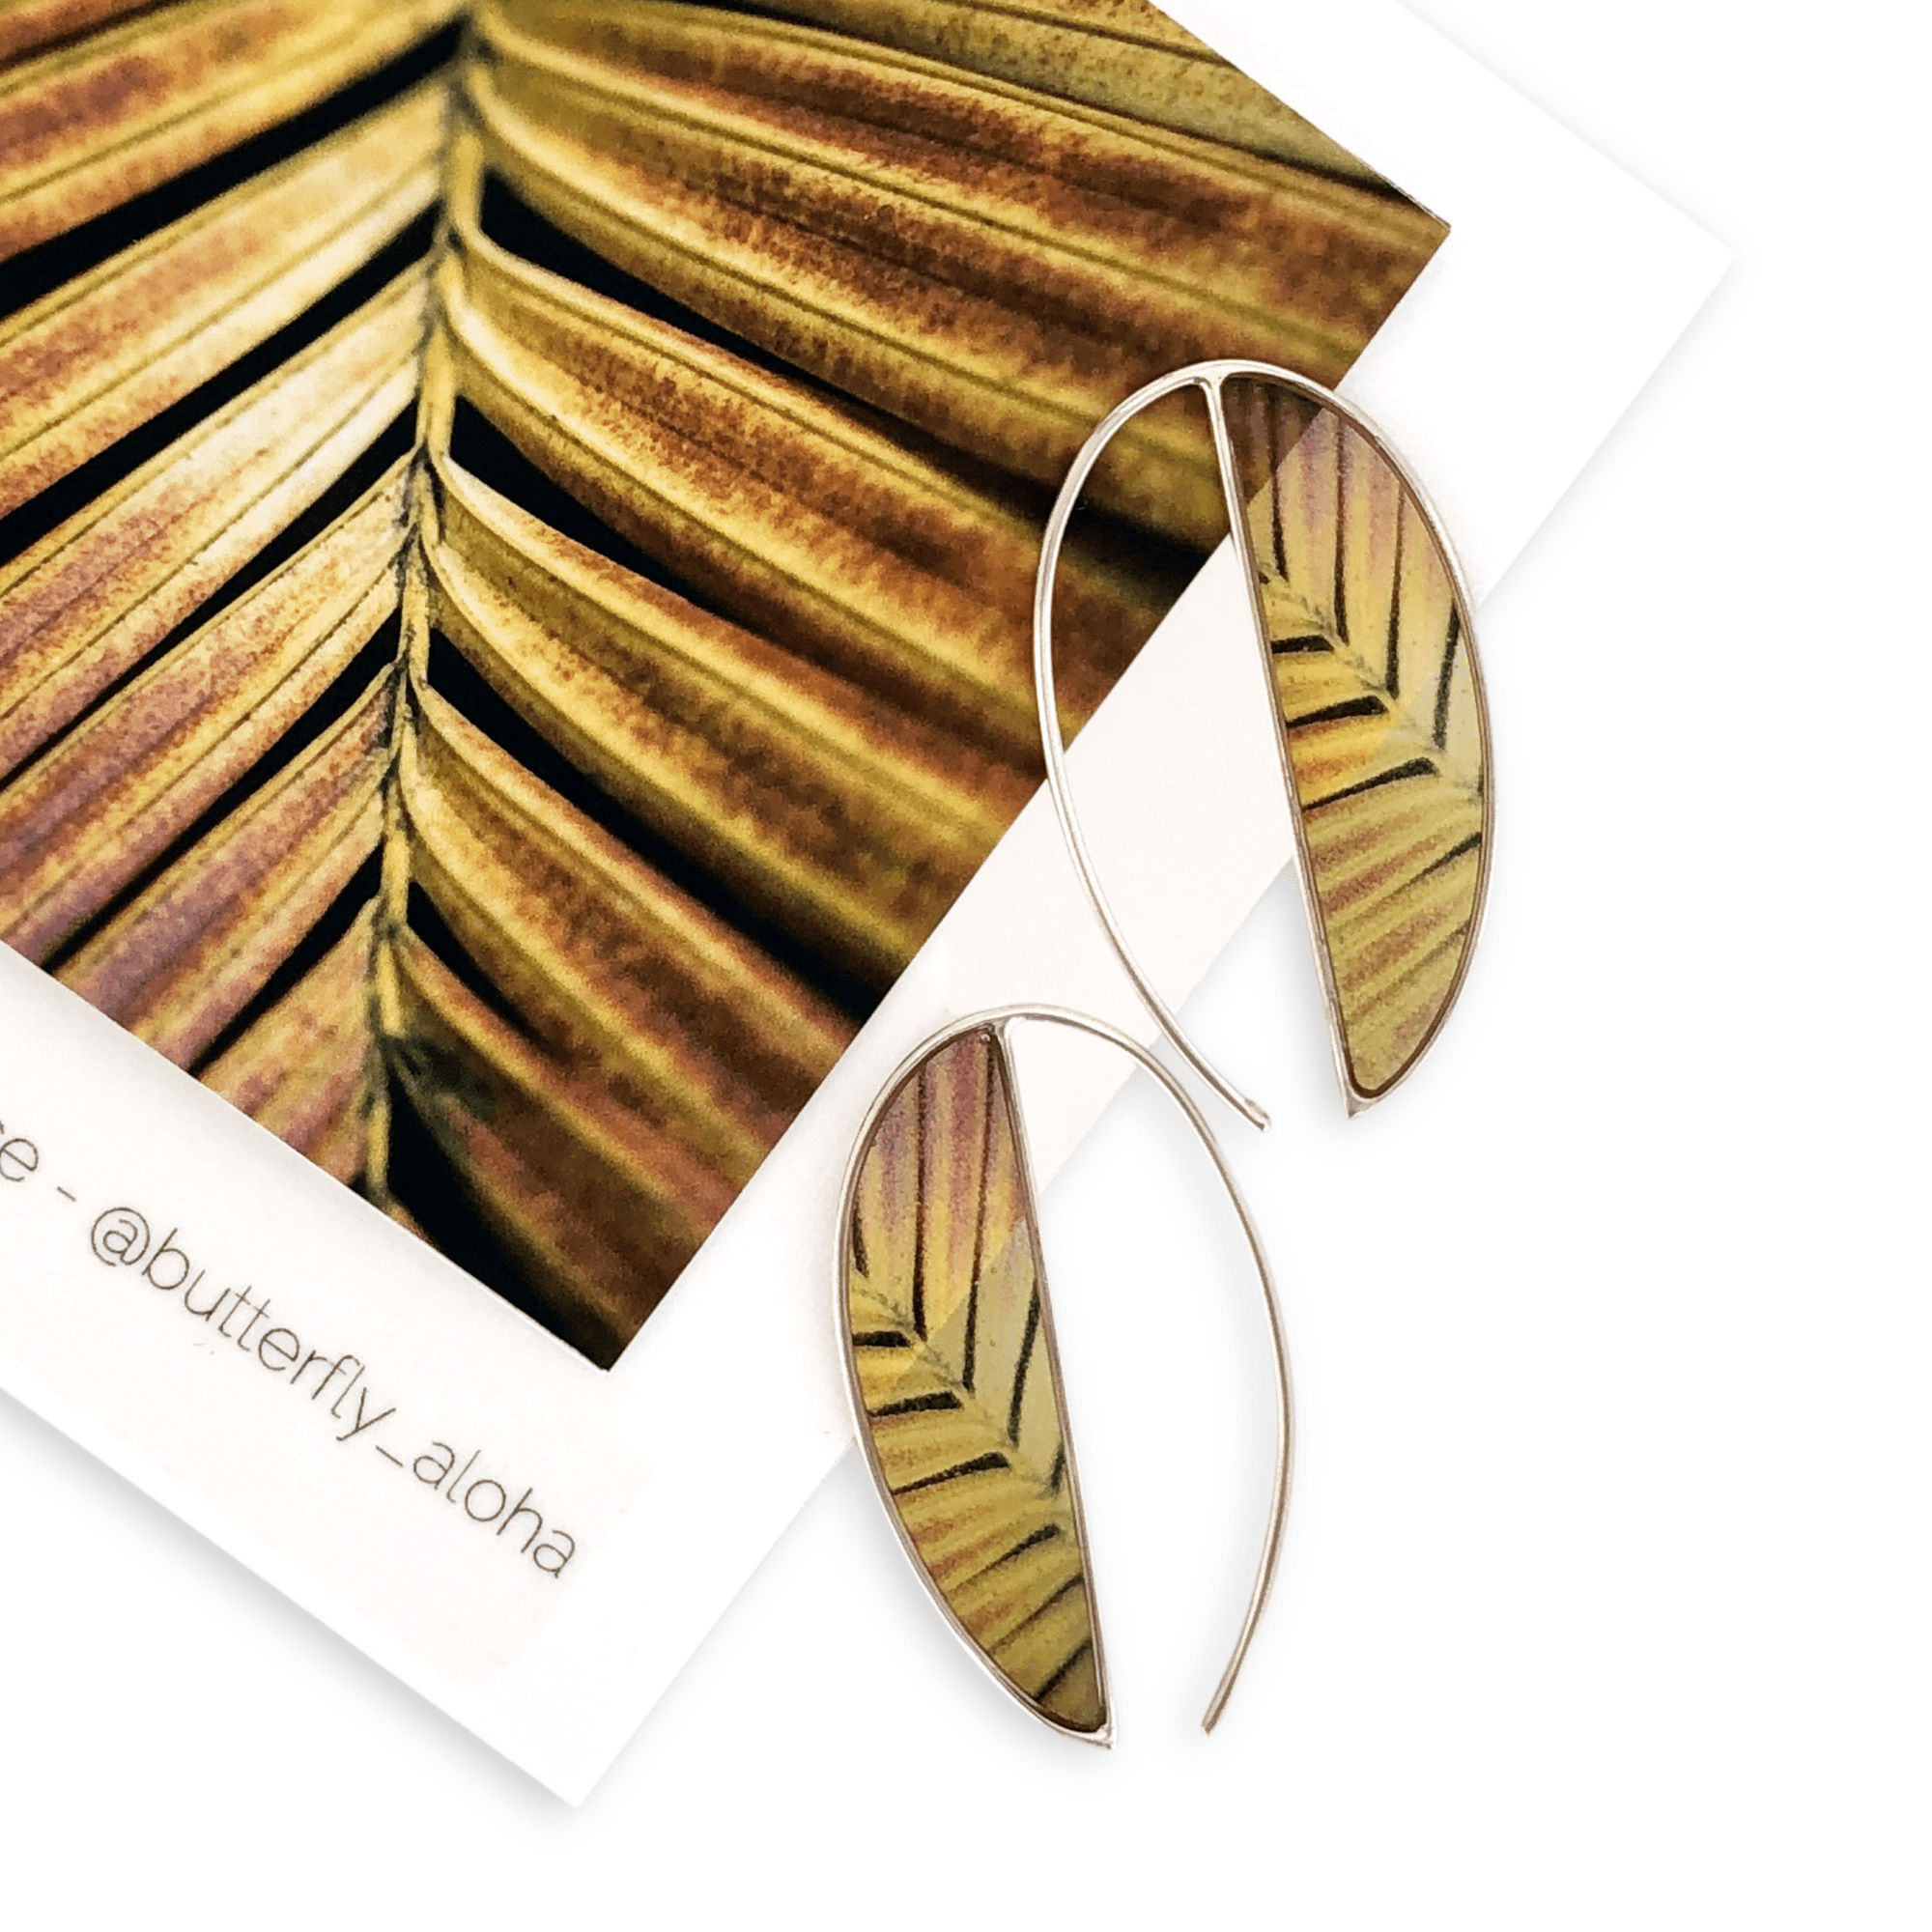 Golden Palm Frond Earrings by Kelly Rice